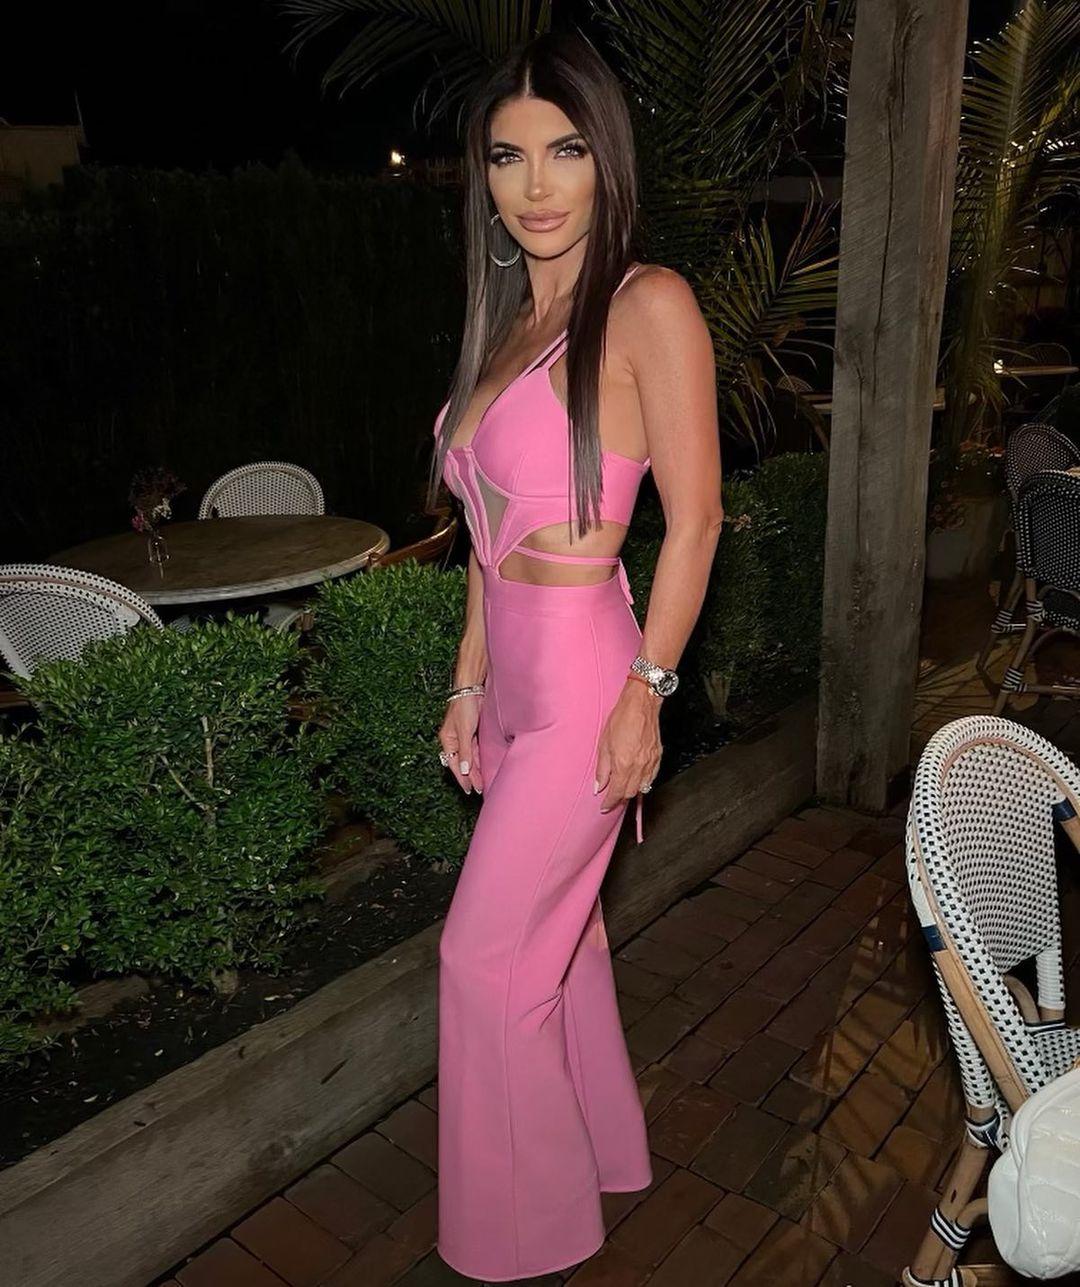 Teresa Giudice's New Photos Spark Ozempic Accusations From Fans: 'Ozempic Barbie'